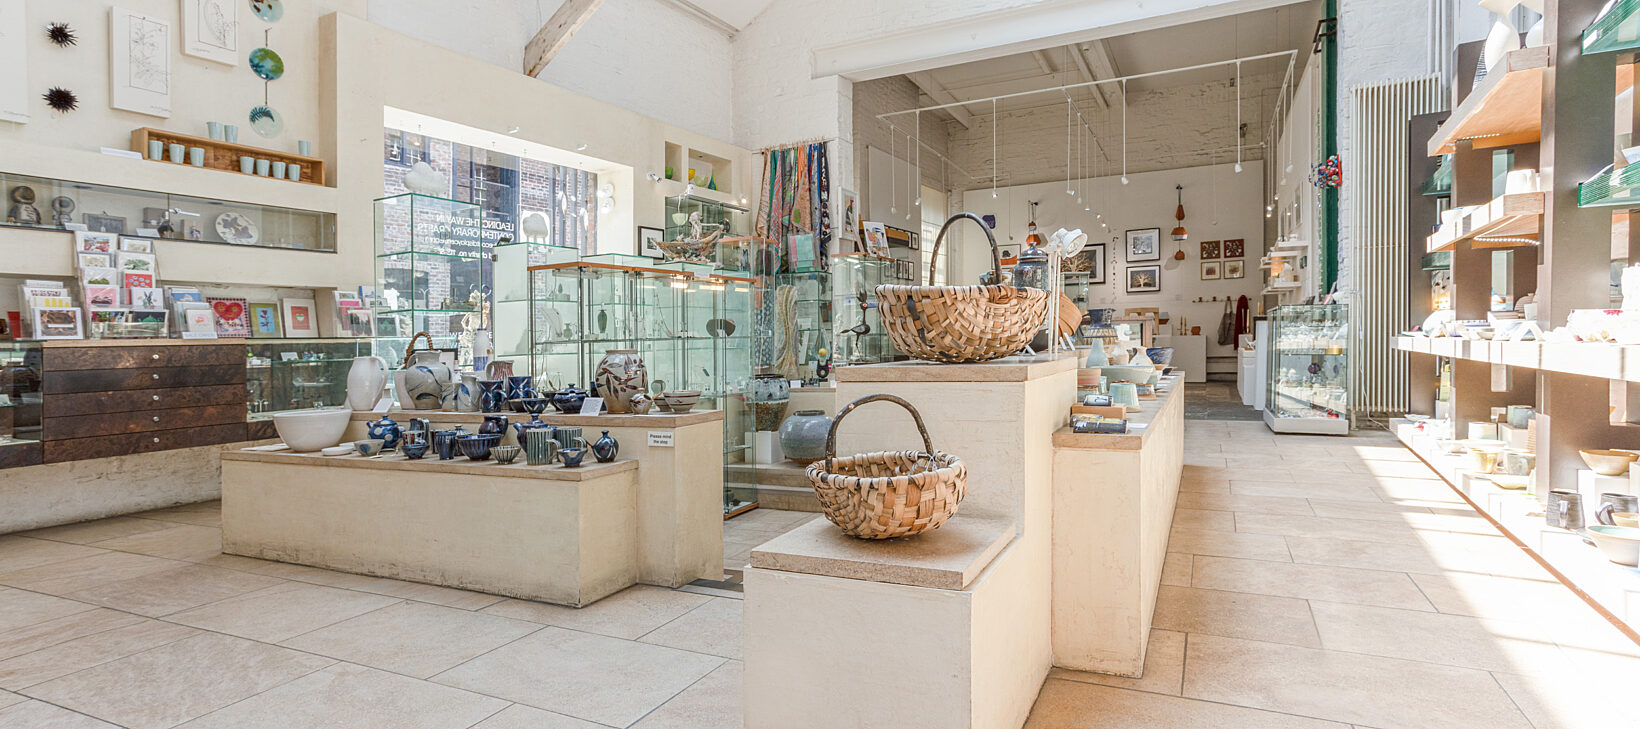 Image displays the interior of Bluecoat Display Centre shop, with shelves of various gifts.